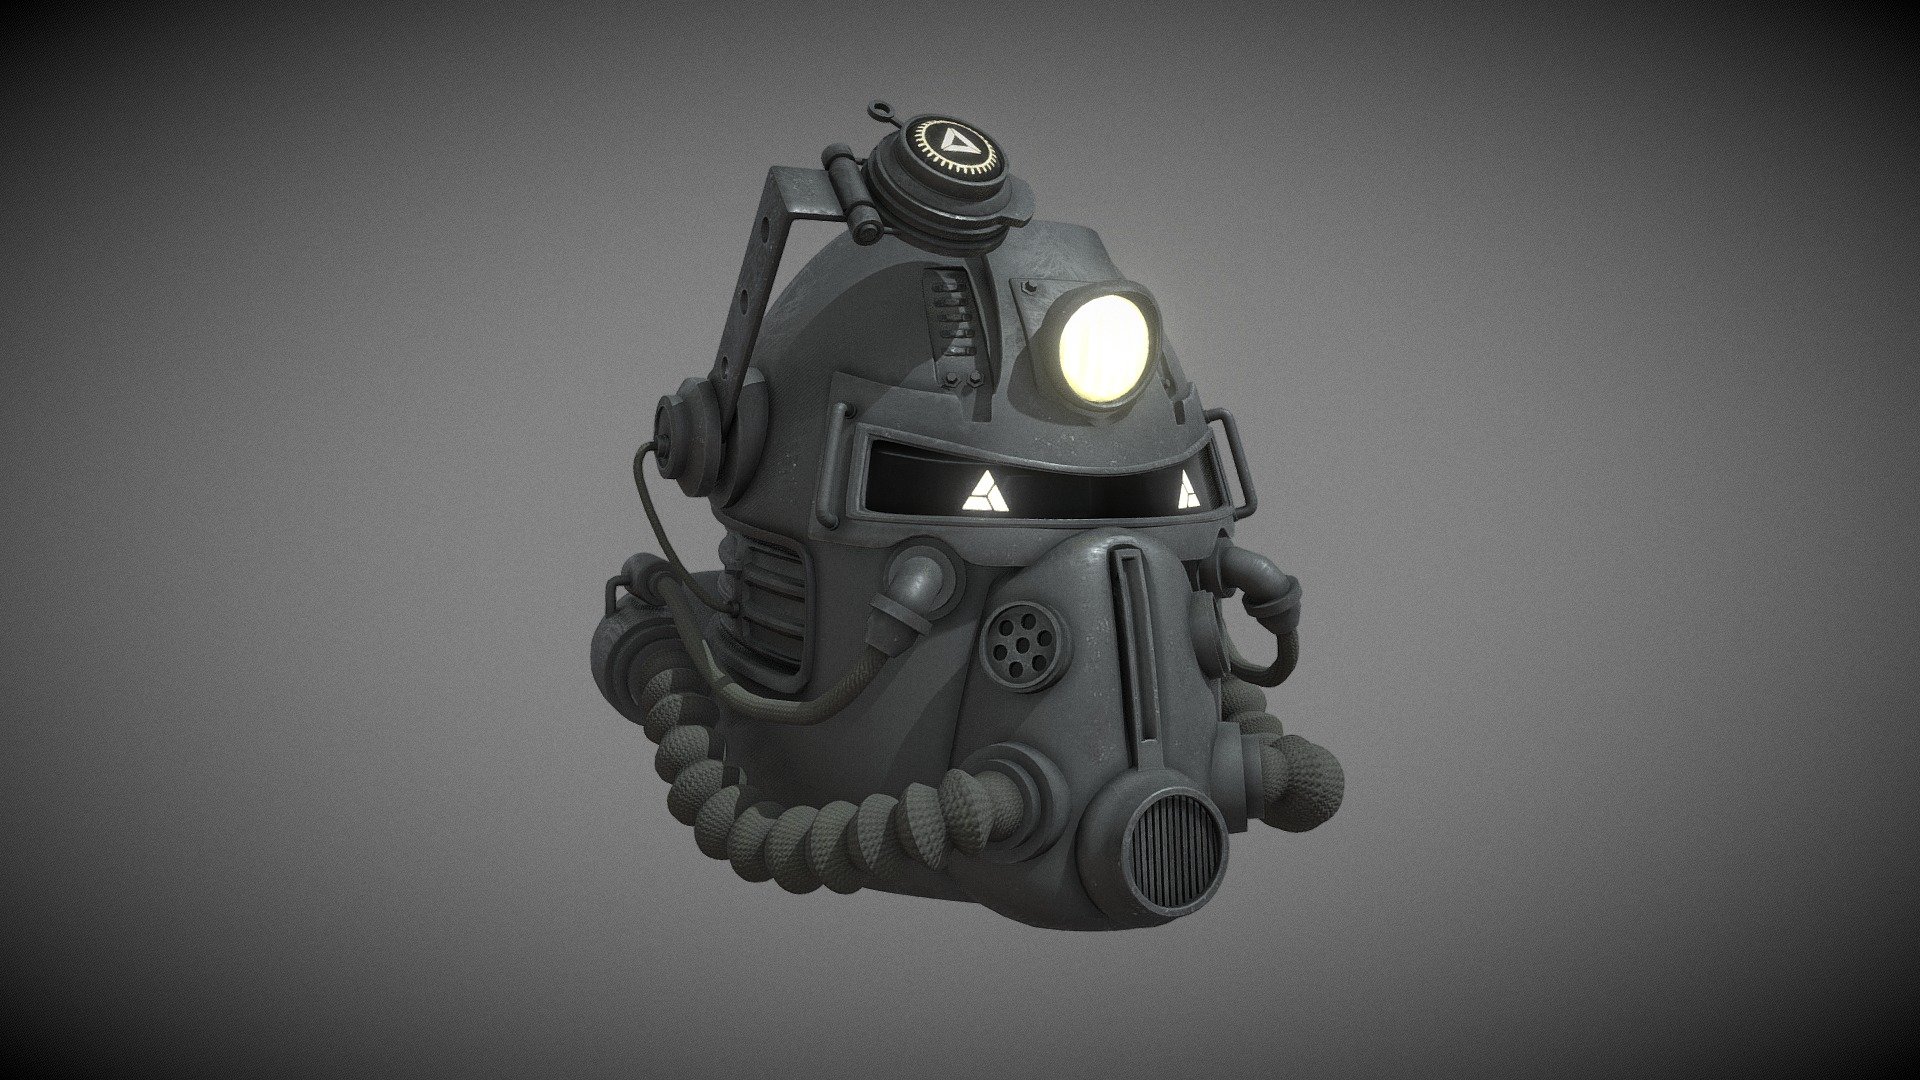 Fallout T-51B Helmet Brotherhood of Steel - Model/Art by Outworld Studios

Must give credit to Outworld Studios if using the asset.

Show support by joining my discord: https://discord.gg/EgWSkp8Cxn - Fallout T-51B Helmet Brotherhood of Steel - Buy Royalty Free 3D model by Outworld Studios (@outworldstudios) 3d model